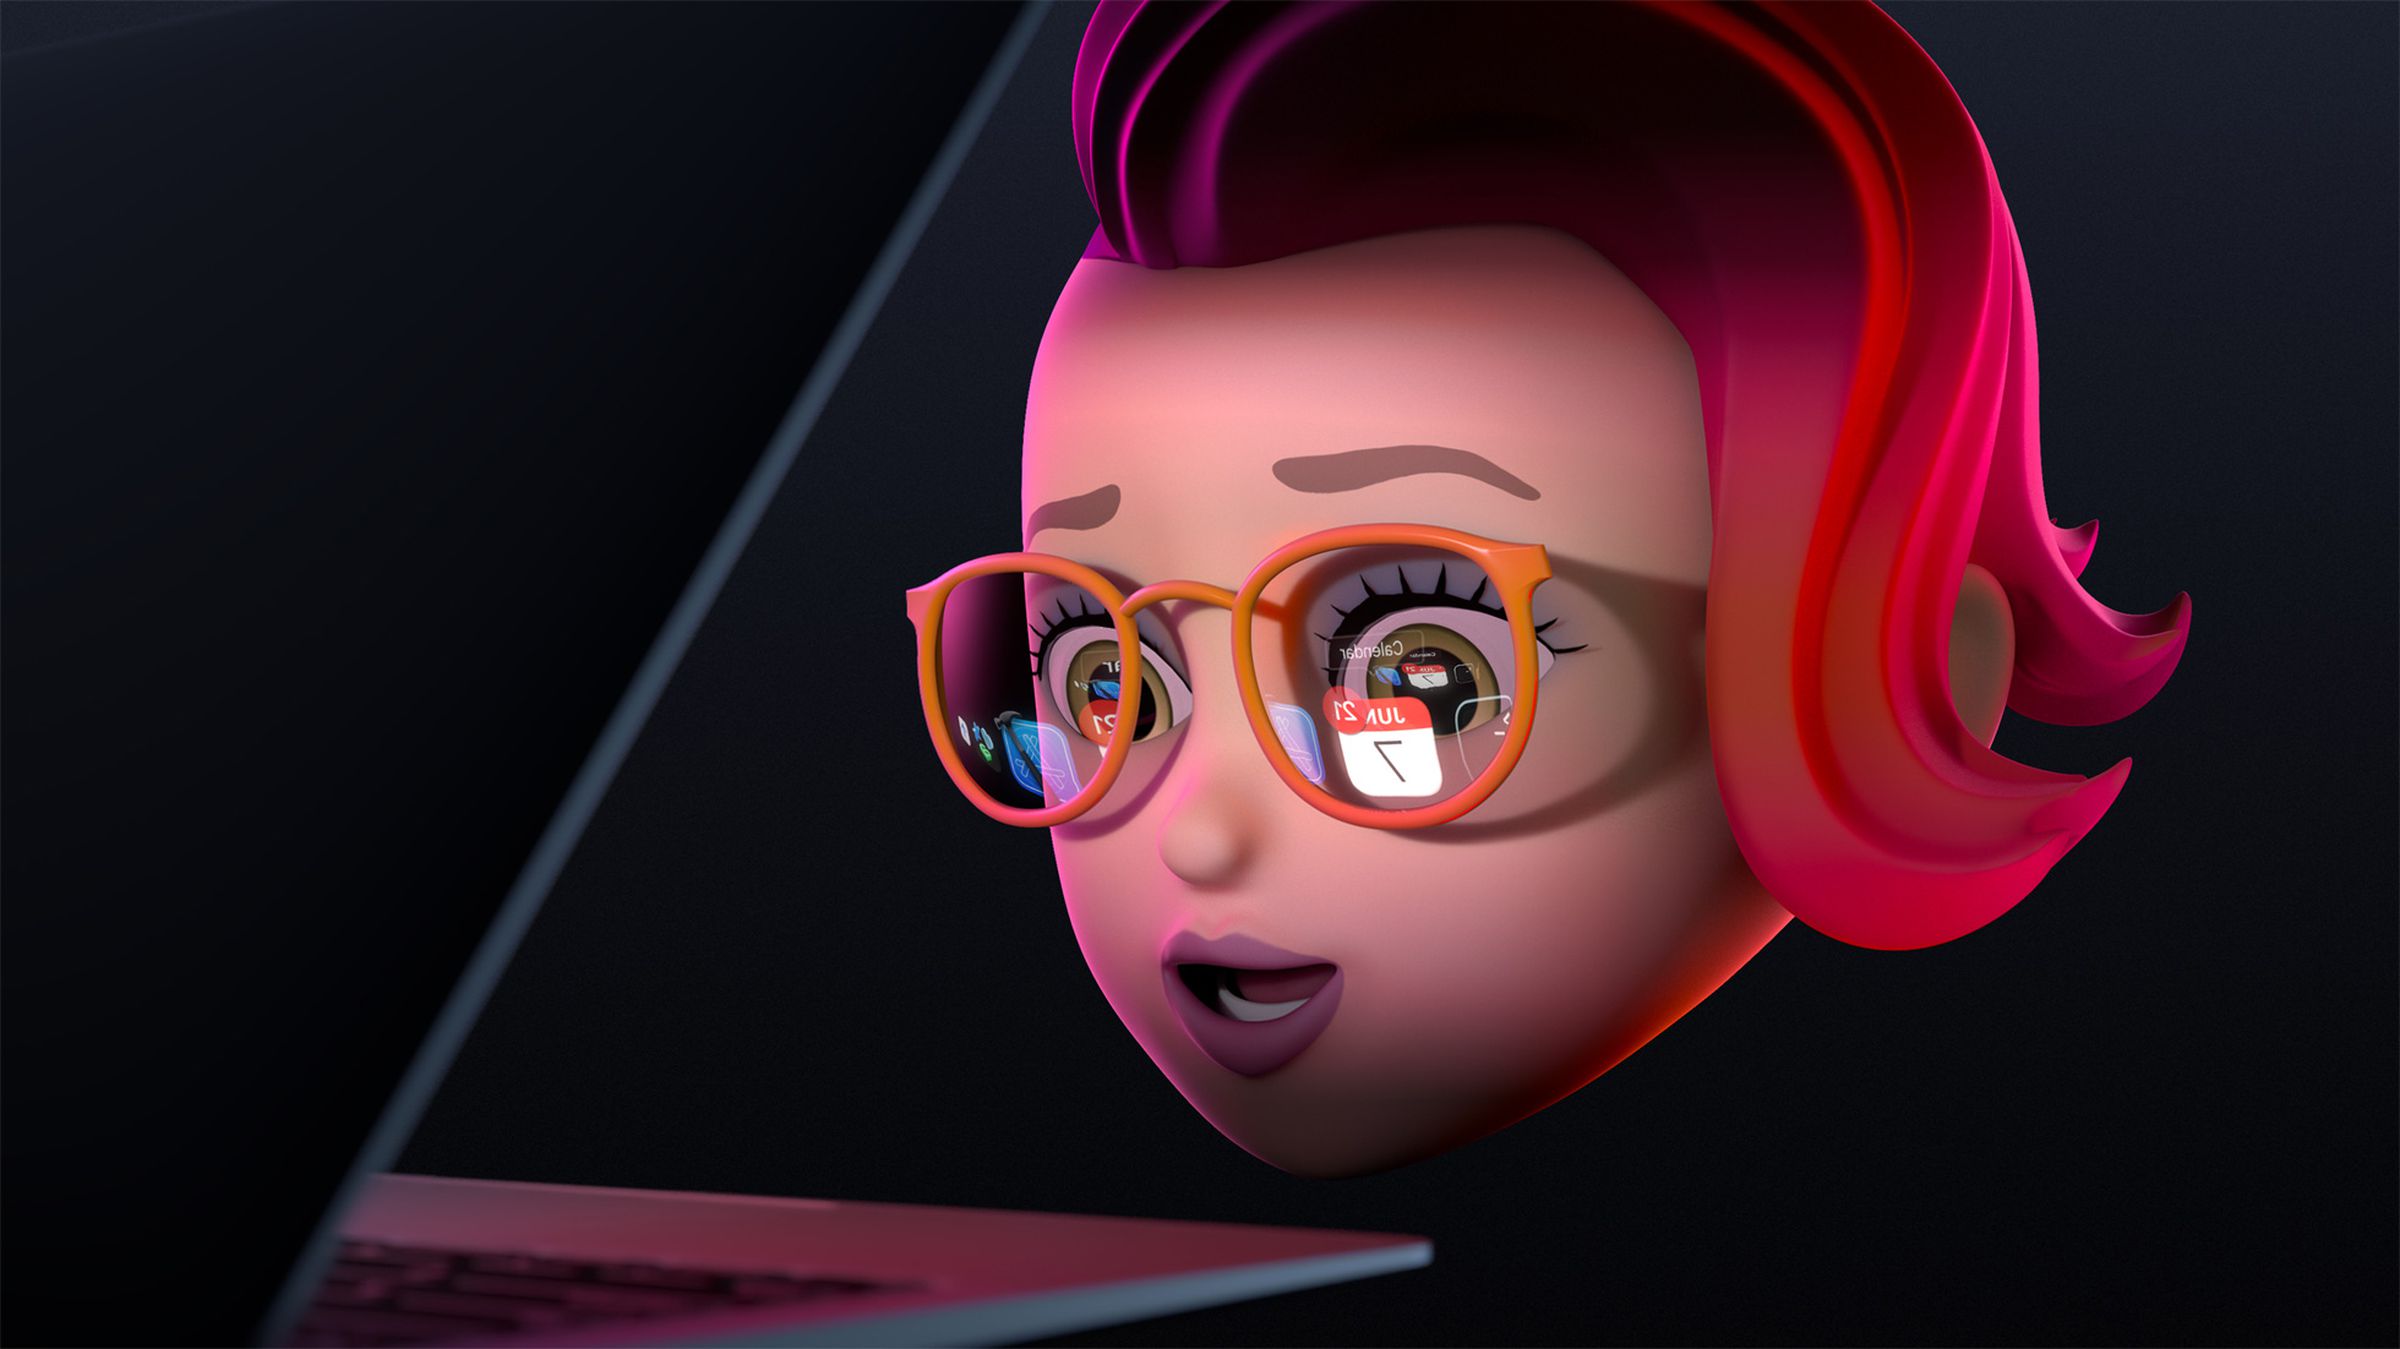 A hint at AR glasses, or just someone who likes what they see on this Mac?